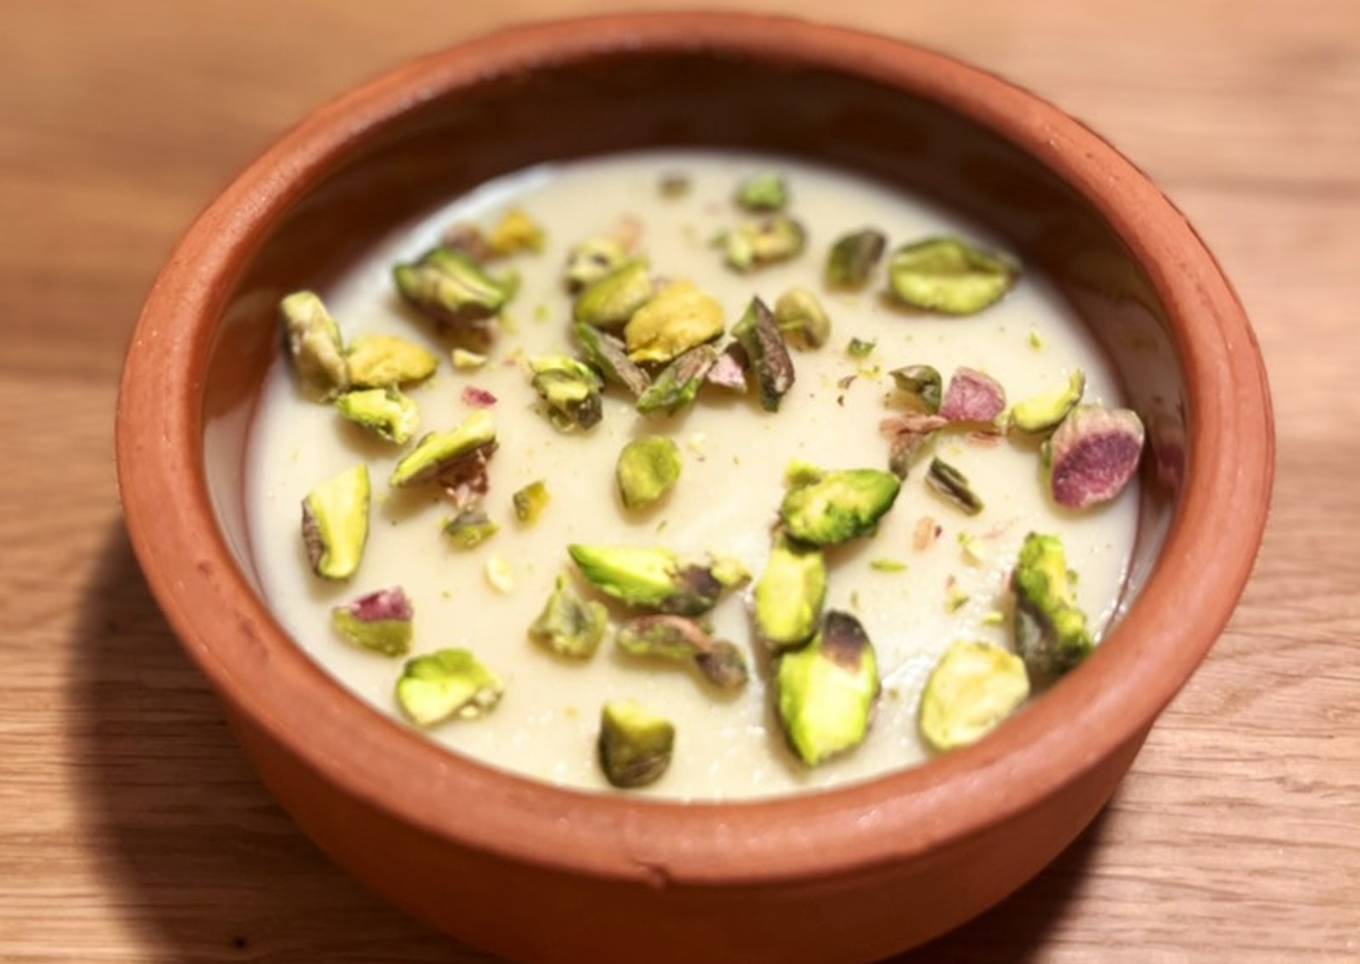 Mouhalabiyeh – Middle eastern milk pudding with cardamom and saffron (vegan)